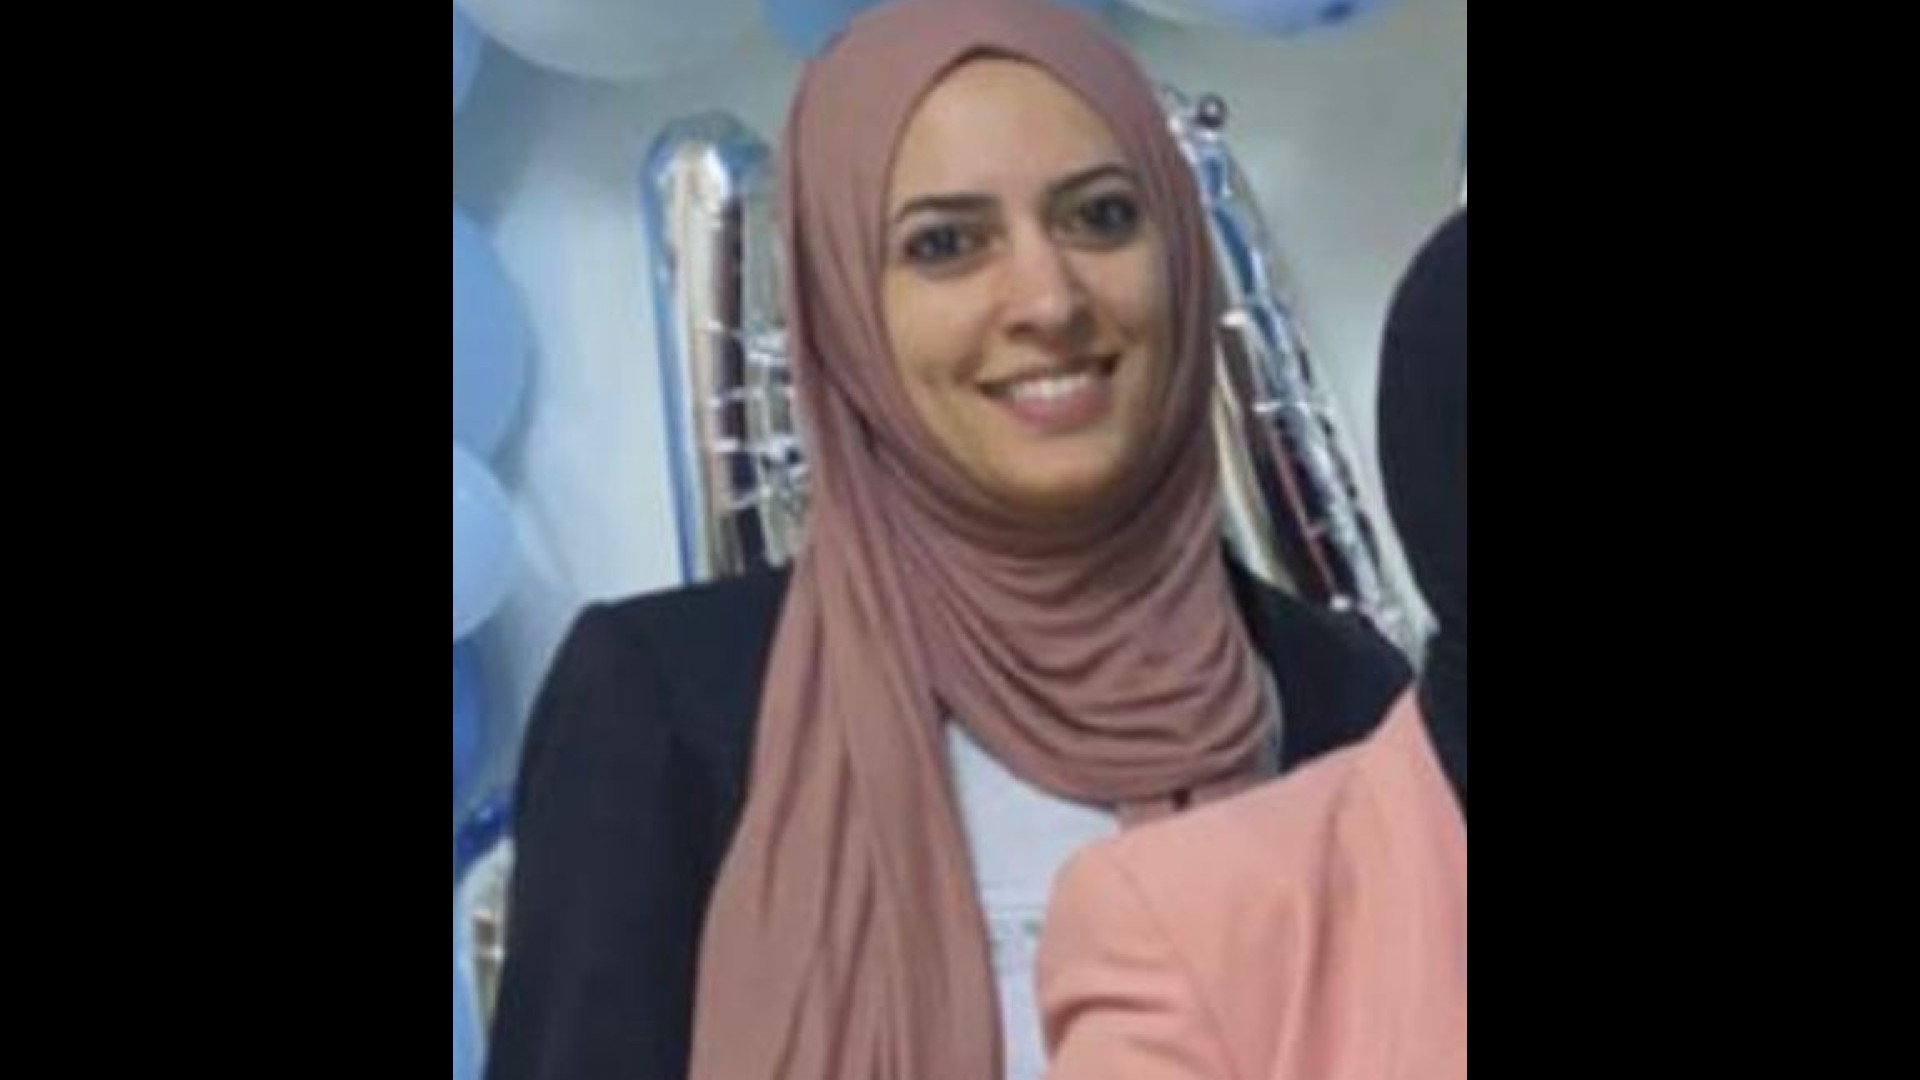 Fatima Shaheen, 33, is among Palestinian women expected to be released soon as part of a prisoner exchange deal between Israel and Palestinians (provided)